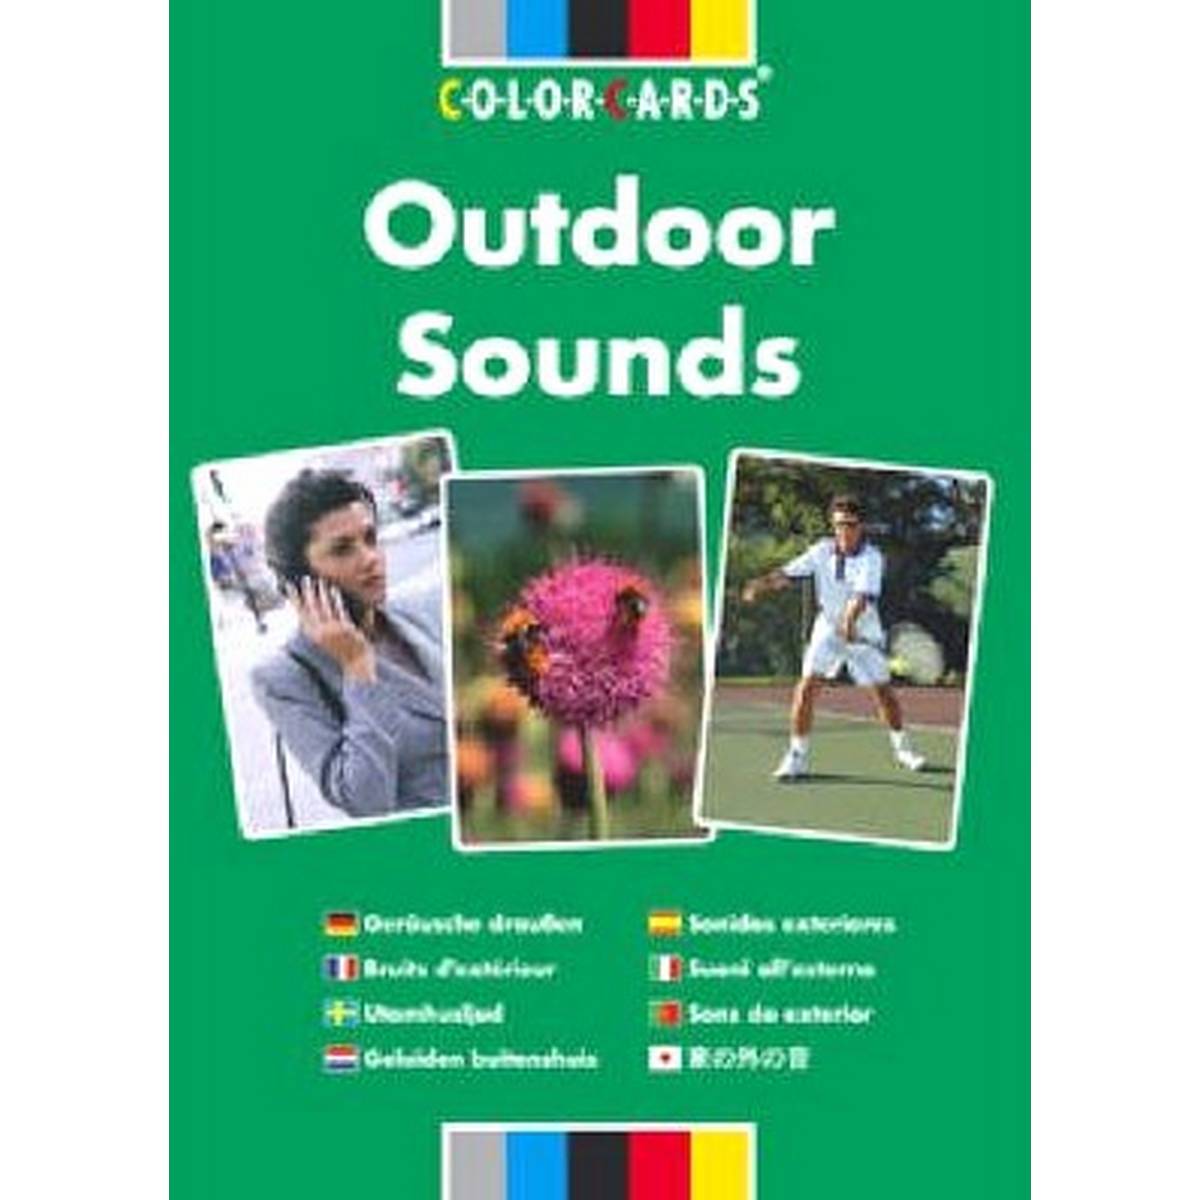 ColorCards: Listening Skills: Outdoor Sounds